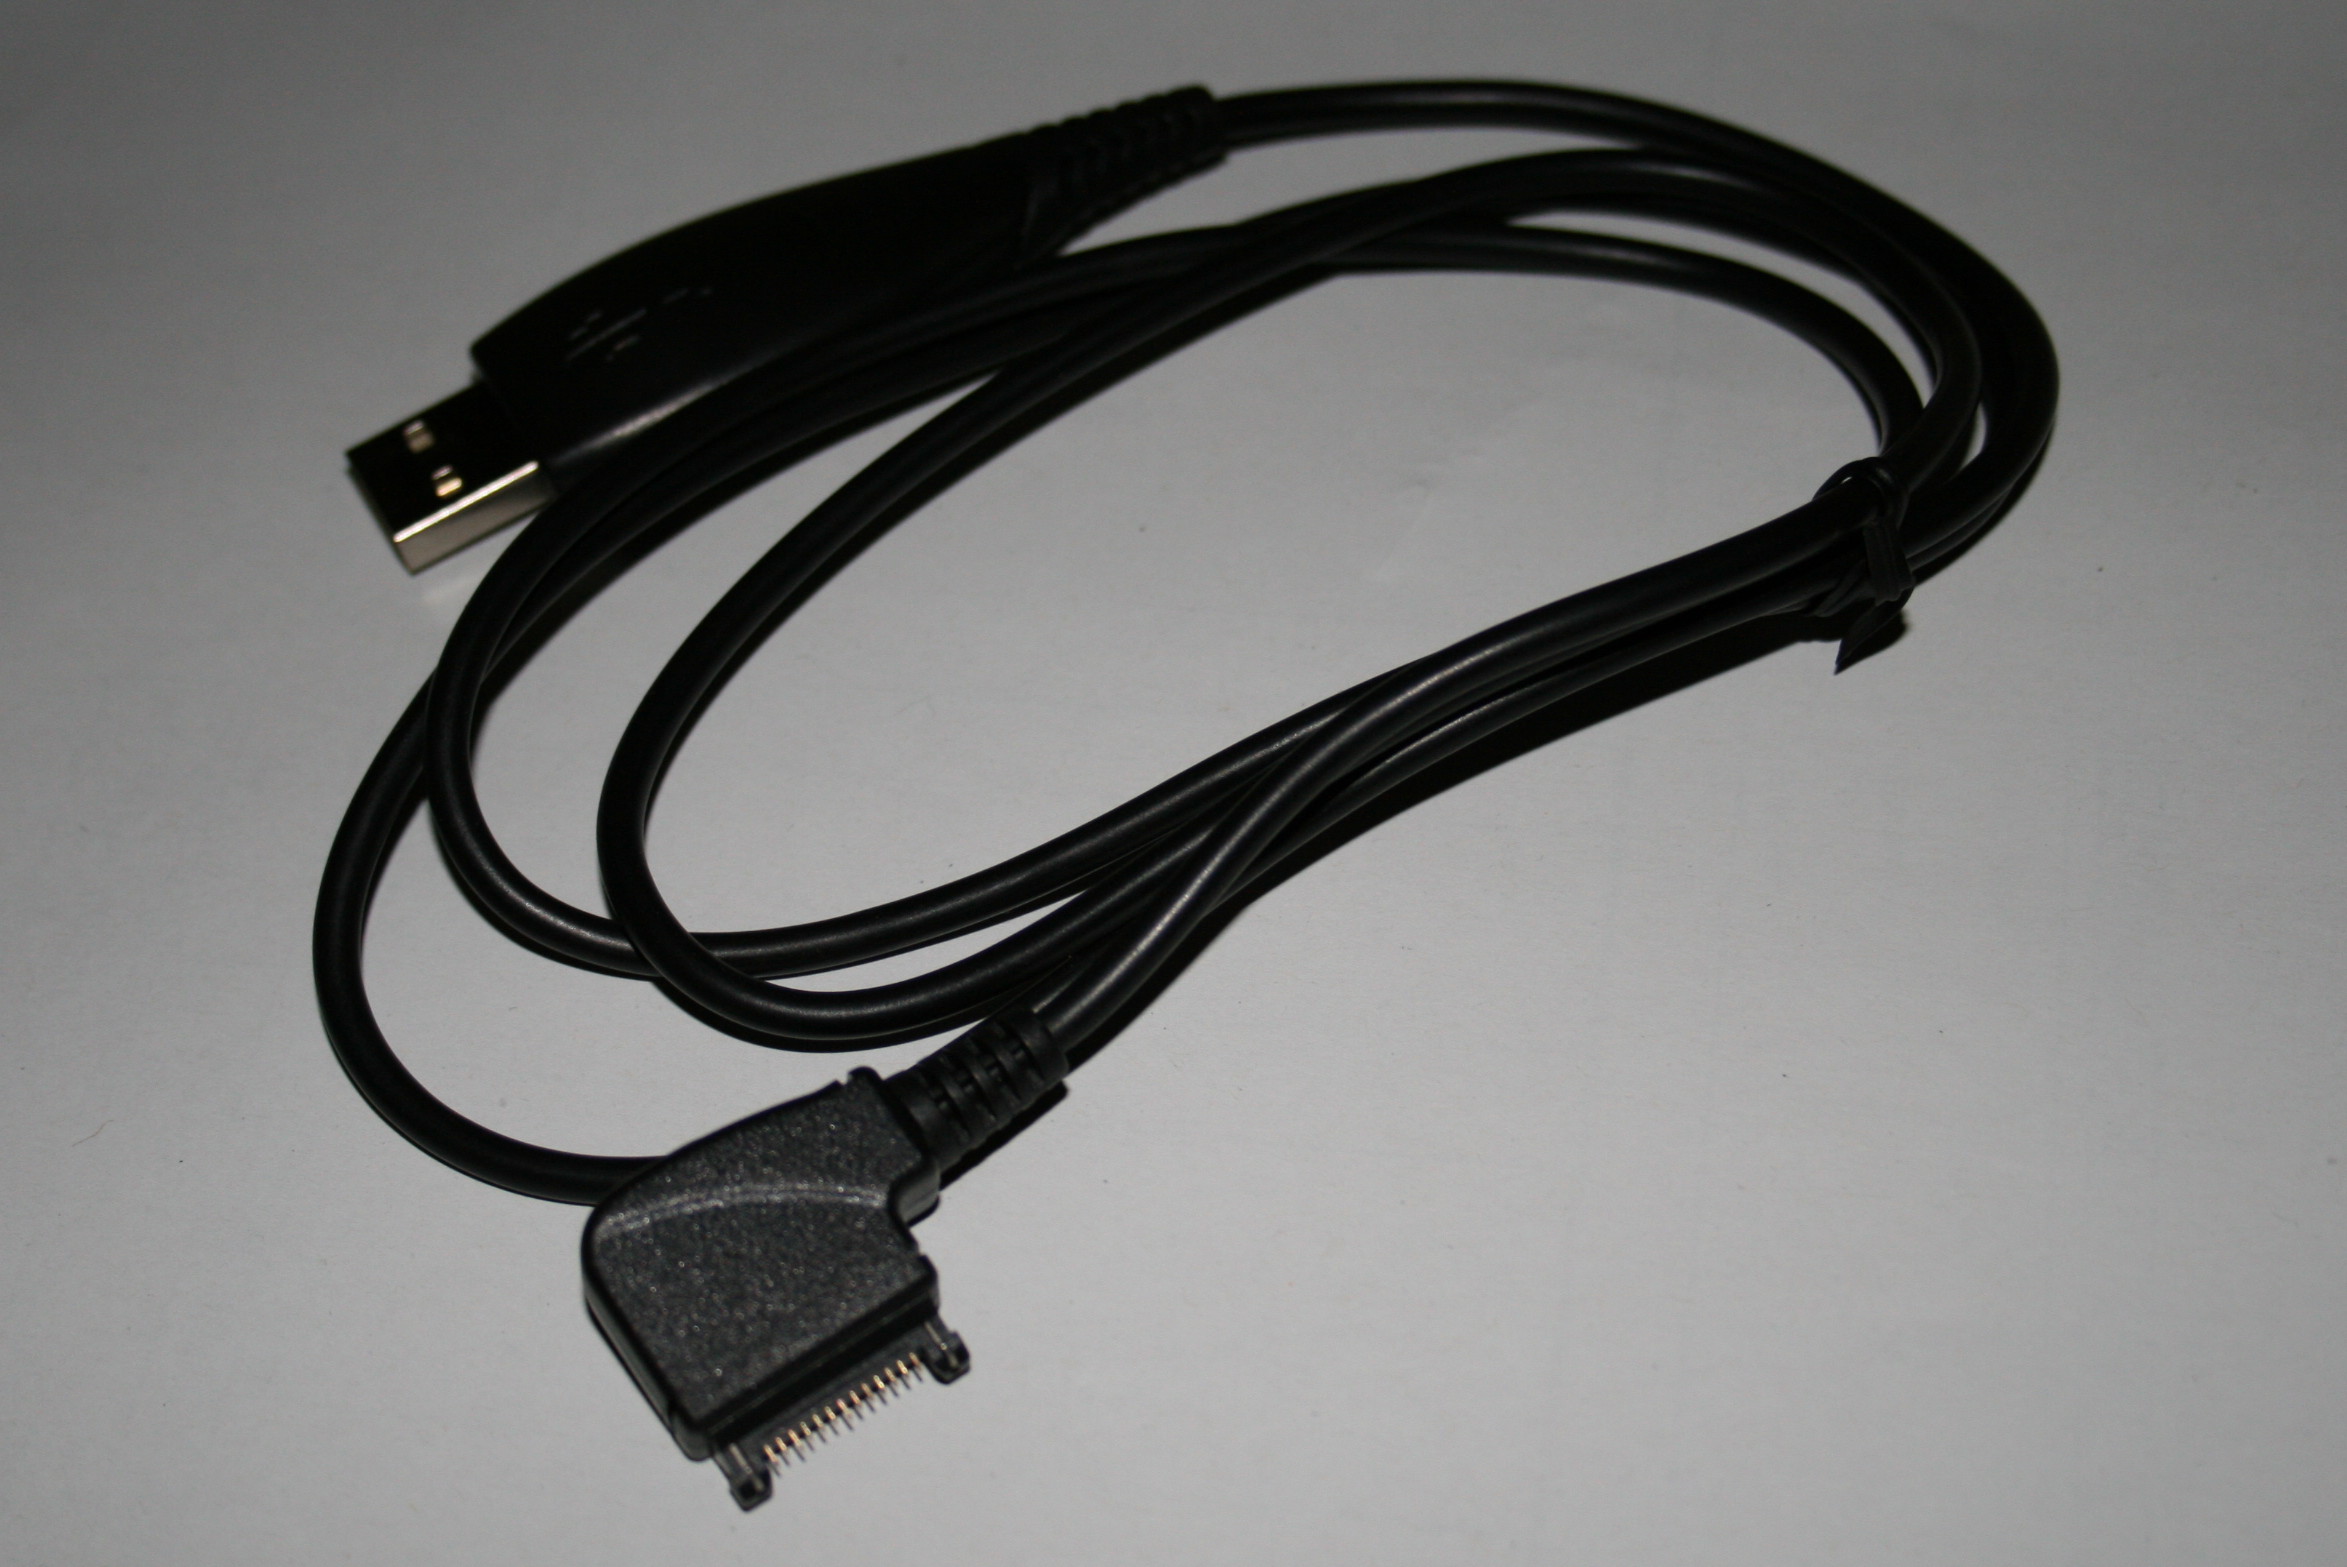 dku 5 cable